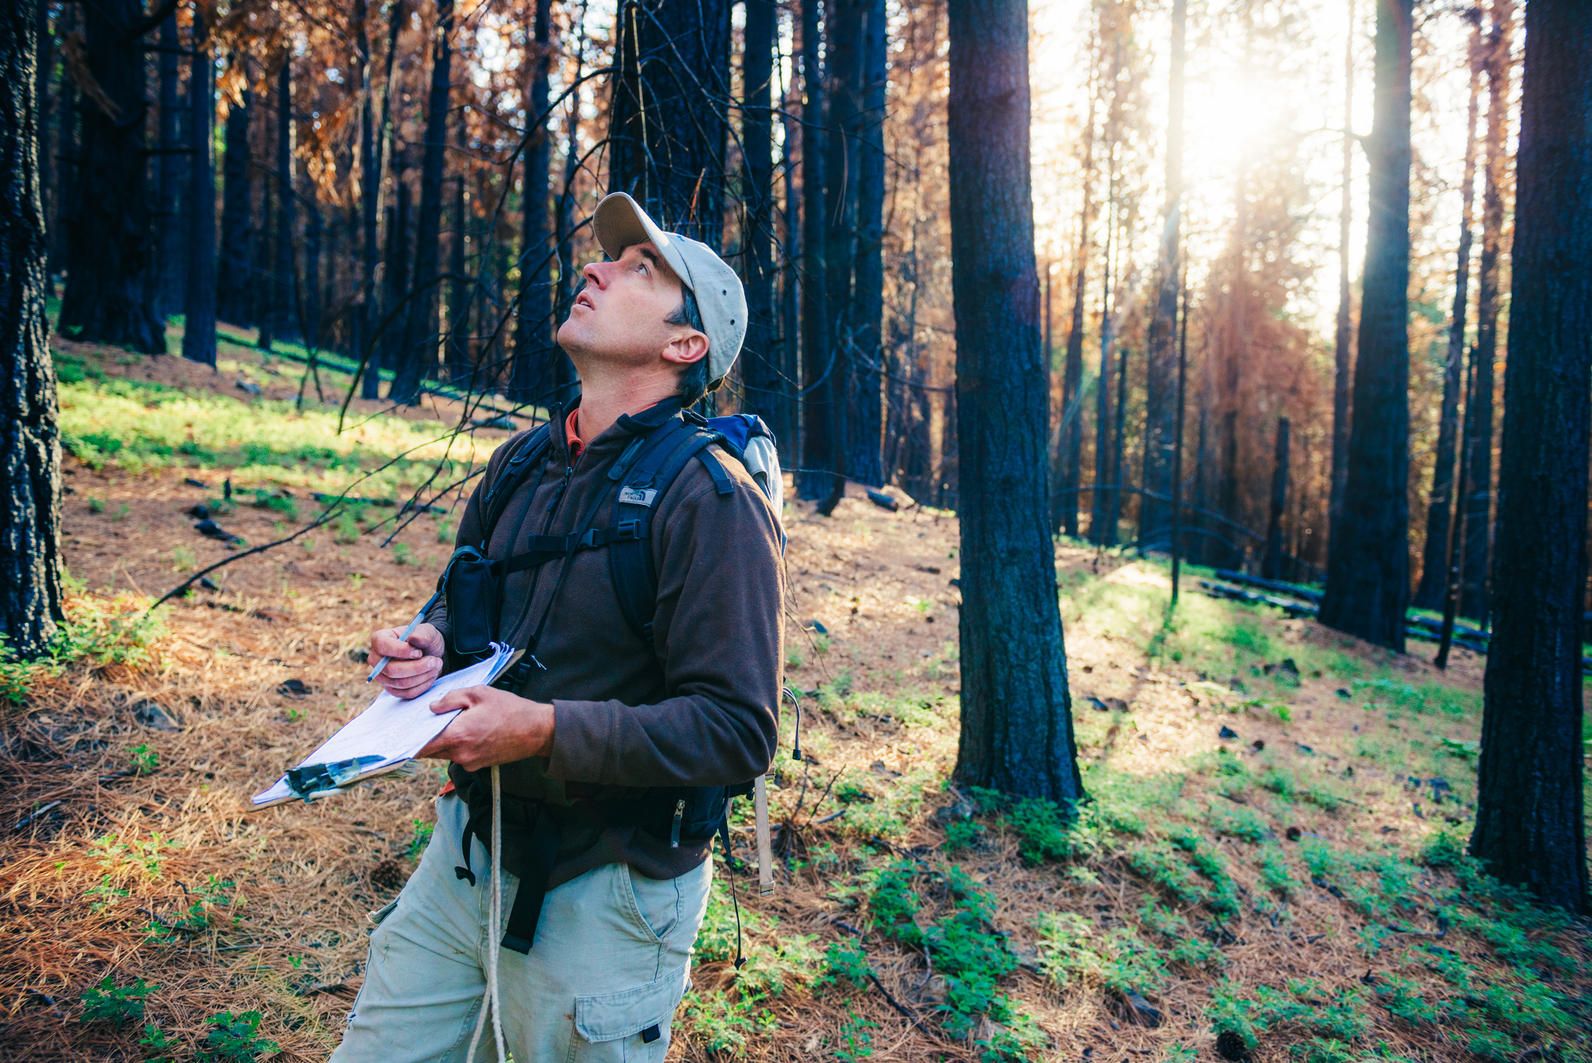 Using this auditory repertoire of several hundred calls, Ryan Burnett monitors birds in five-minute point counts to assess the long-term health of habitat. The Black-backed Woodpecker's call is a sharp, distinct check. Photo: Ken Etzel